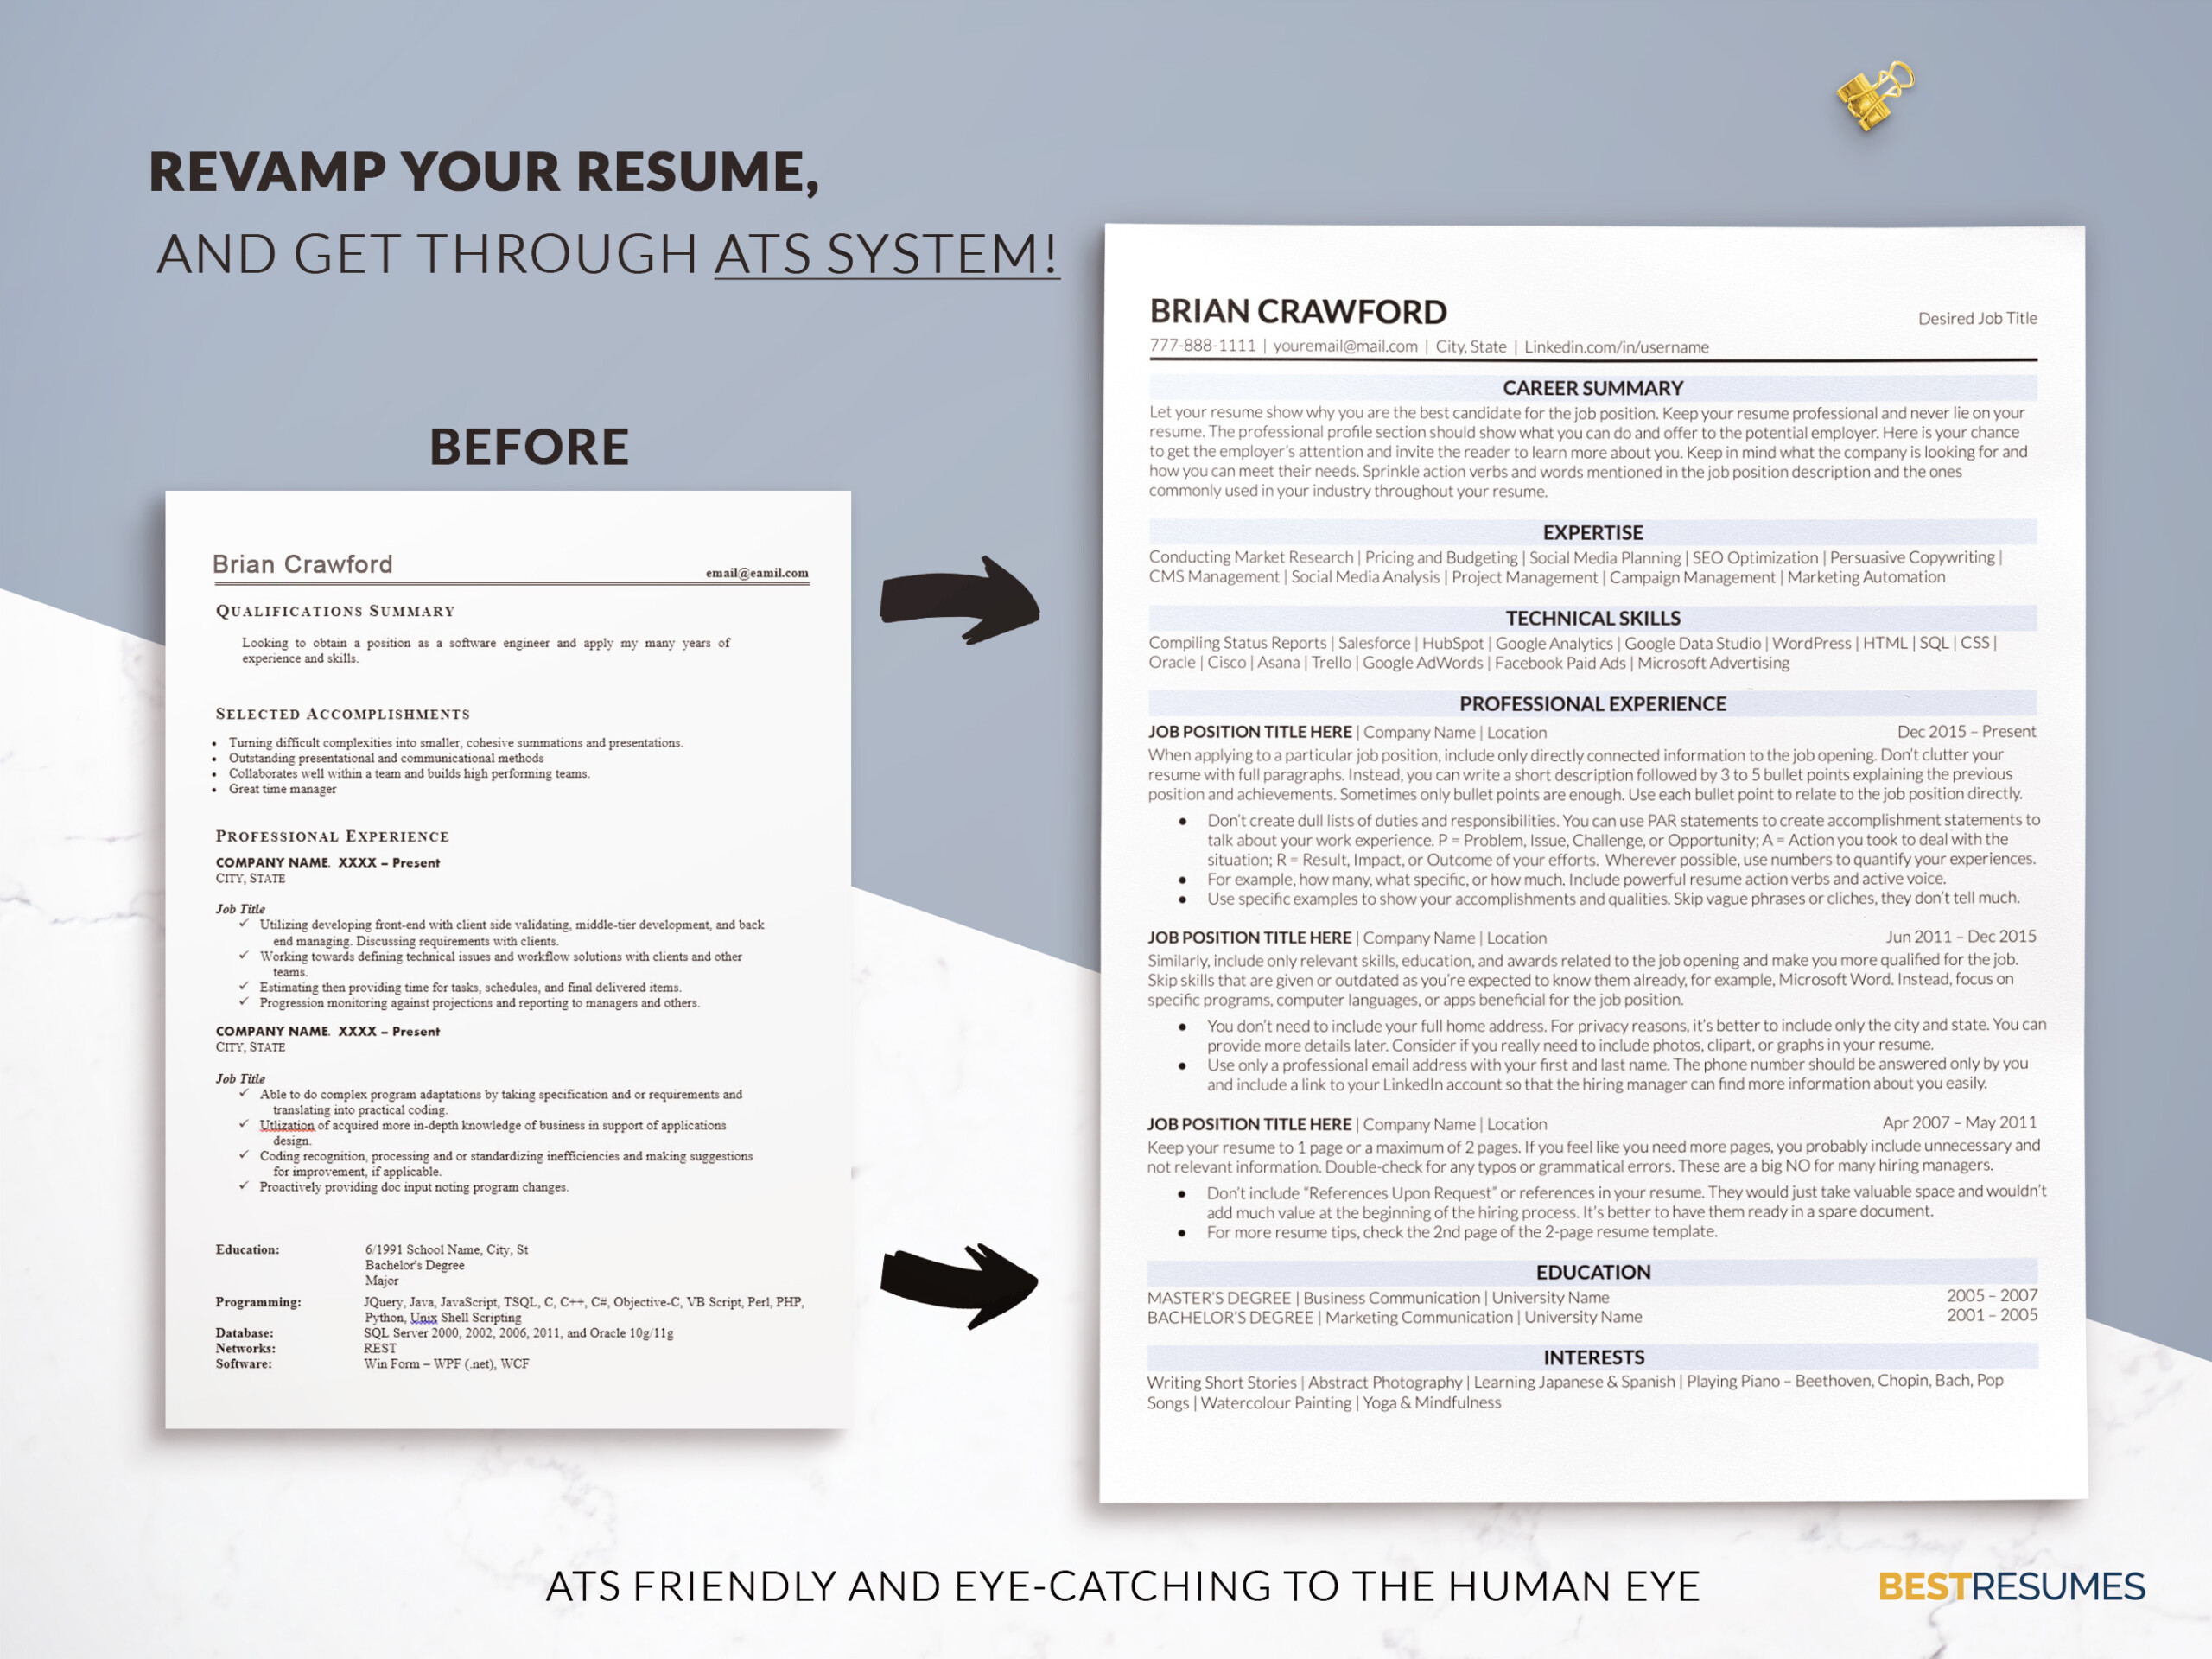 Business ATS Friendly Resume Template Revamp your Resume Brian Crawford